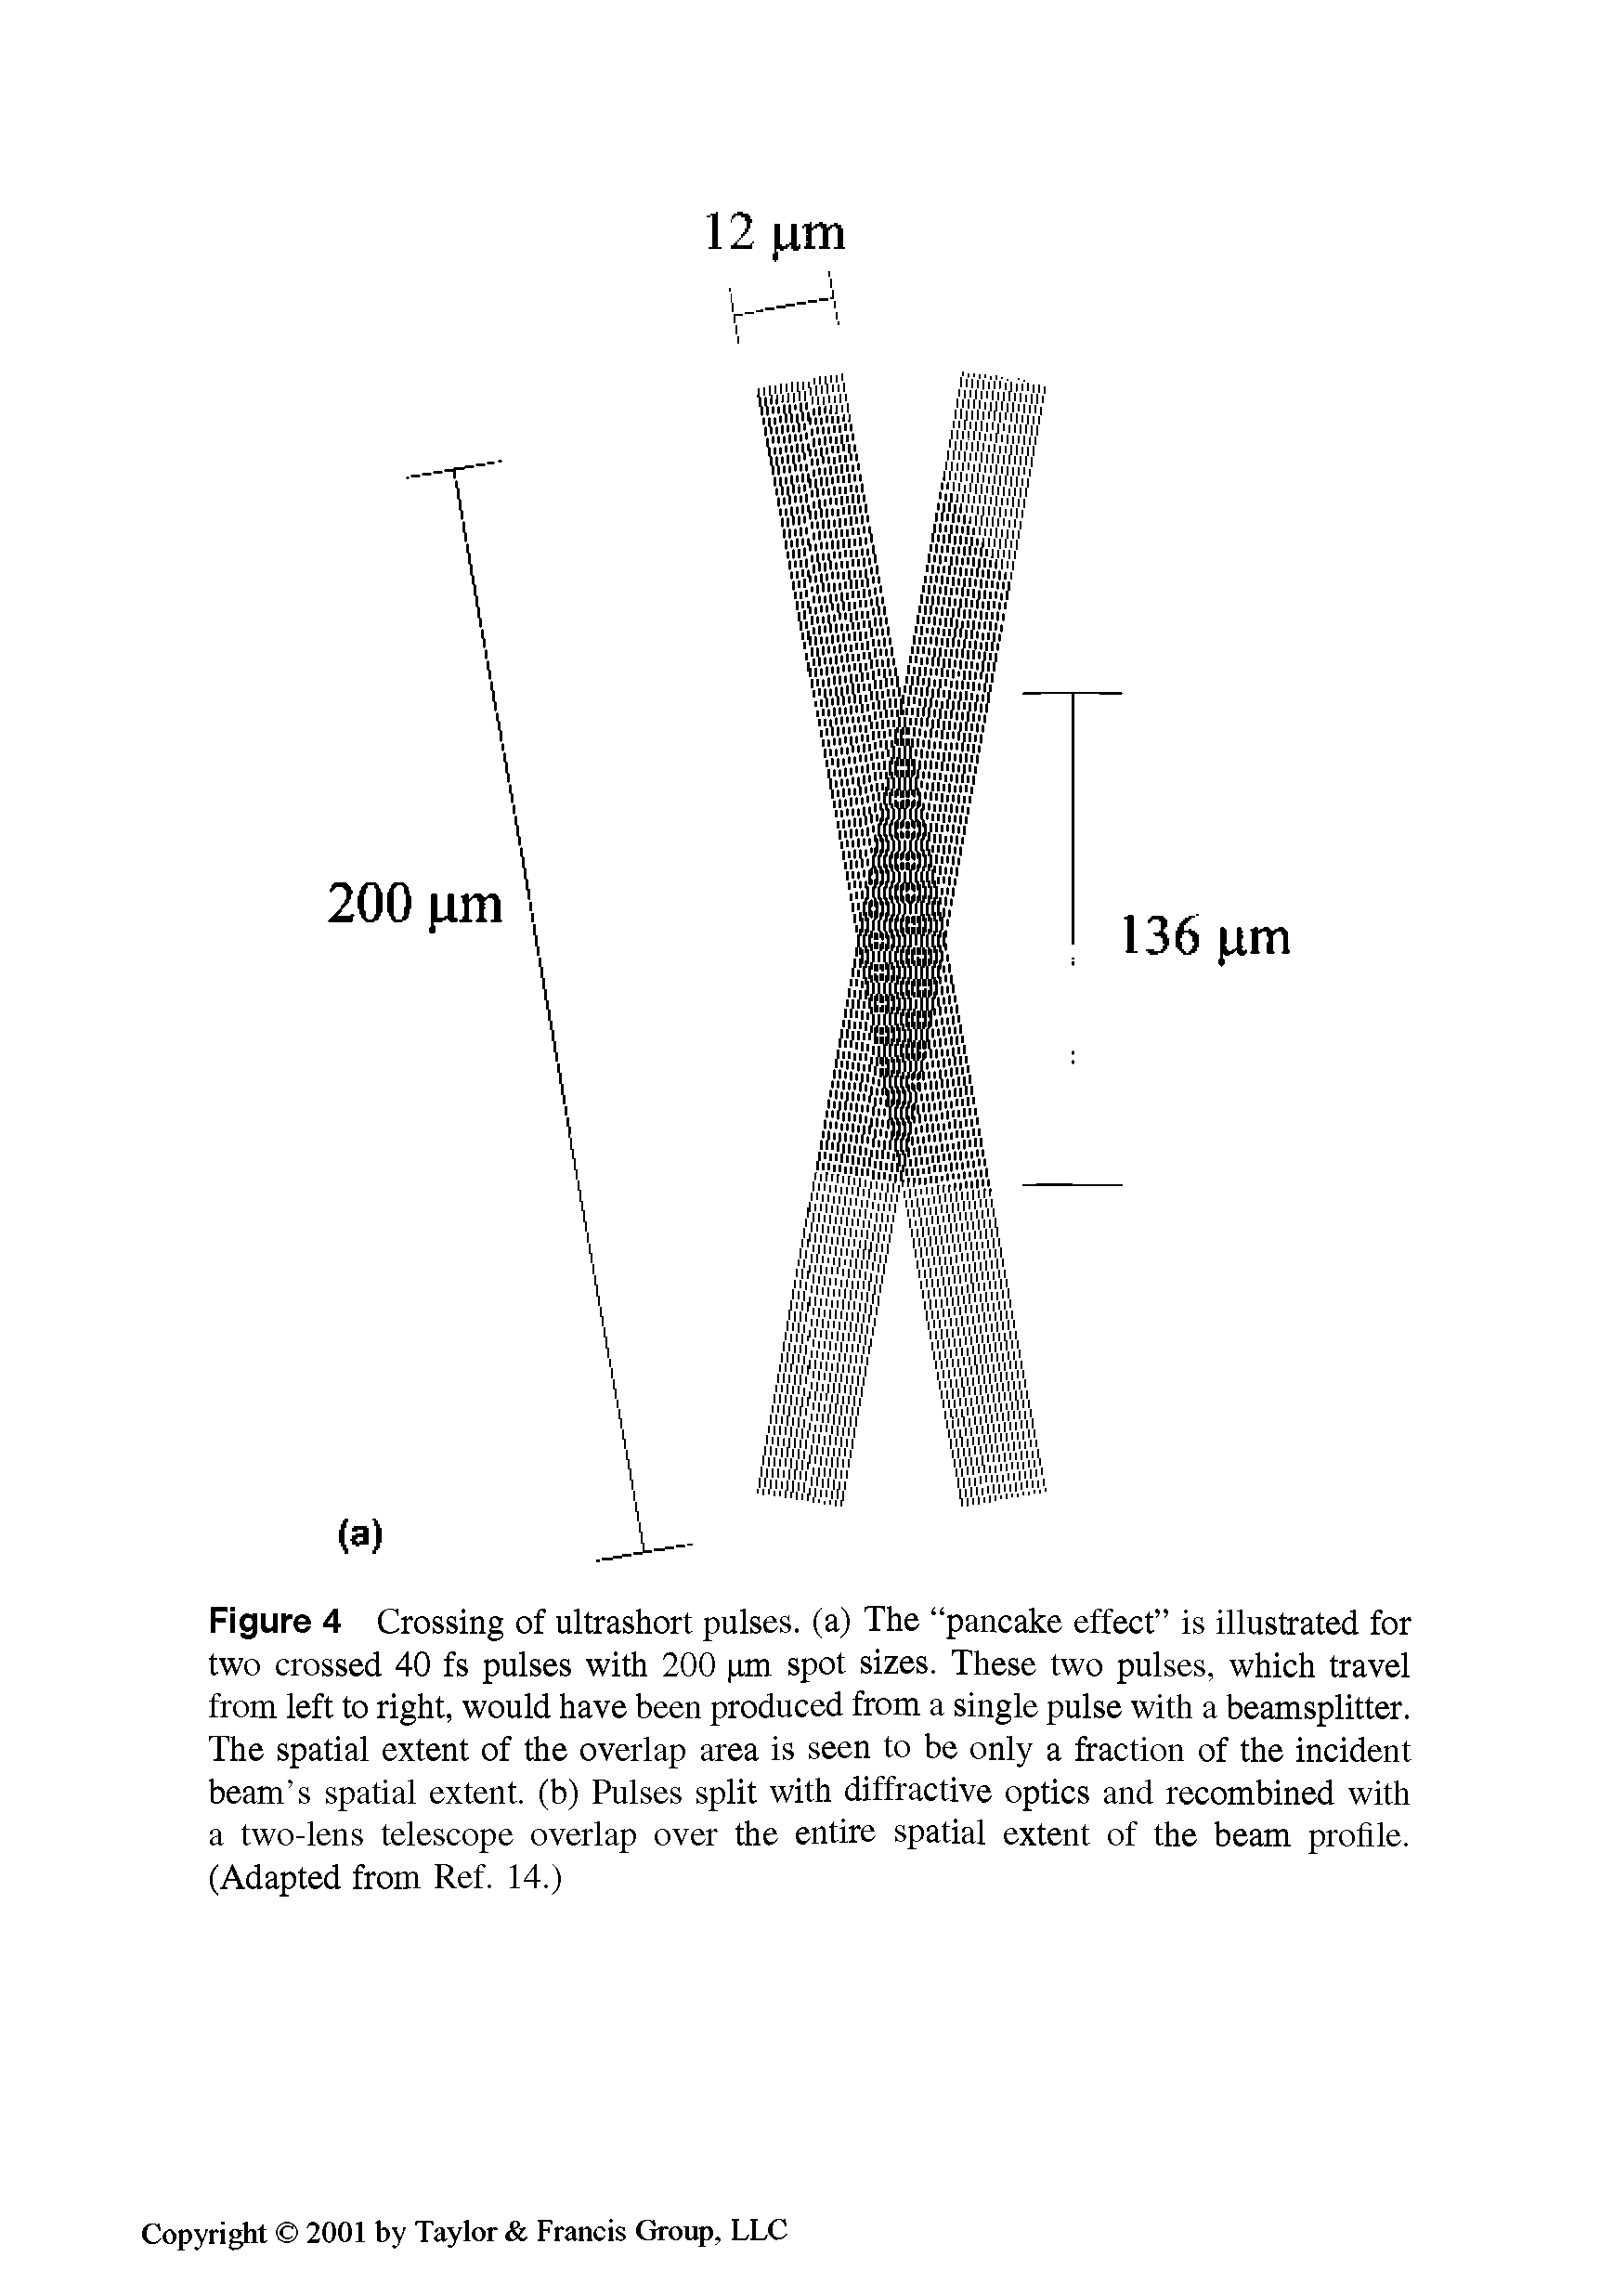 Figure 4 Crossing of ultrashort pulses, (a) The pancake effect is illustrated for two crossed 40 fs pulses with 200 pm spot sizes. These two pulses, which travel from left to right, would have been produced from a single pulse with a beamsplitter. The spatial extent of the overlap area is seen to be only a fraction of the incident beam s spatial extent, (b) Pulses split with diffractive optics and recombined with a two-lens telescope overlap over the entire spatial extent of the beam profile. (Adapted from Ref. 14.)...